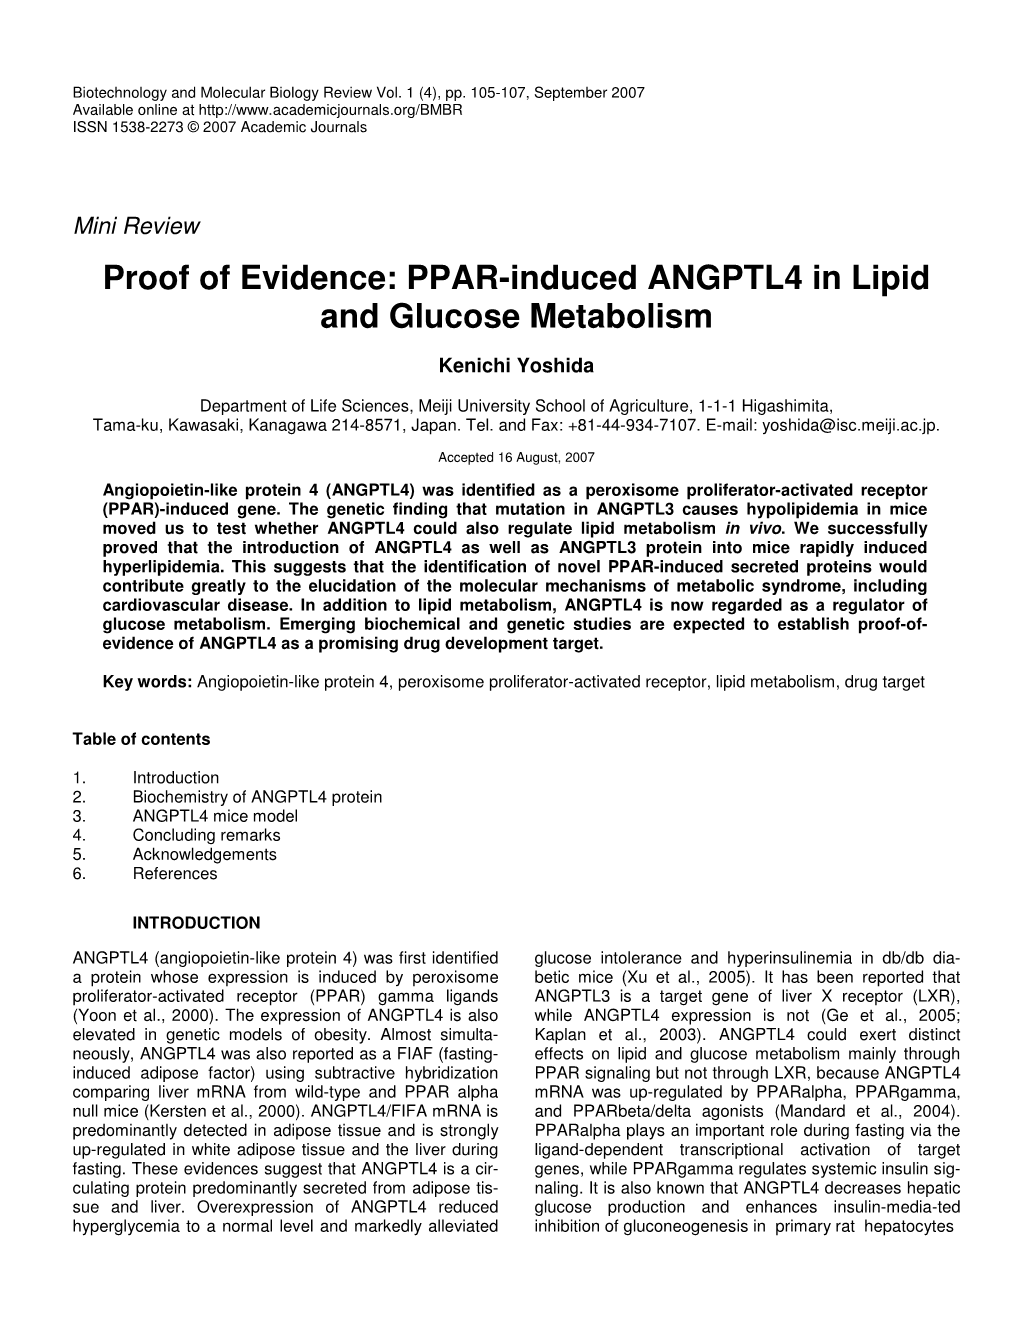 PPAR-Induced ANGPTL4 in Lipid and Glucose Metabolism